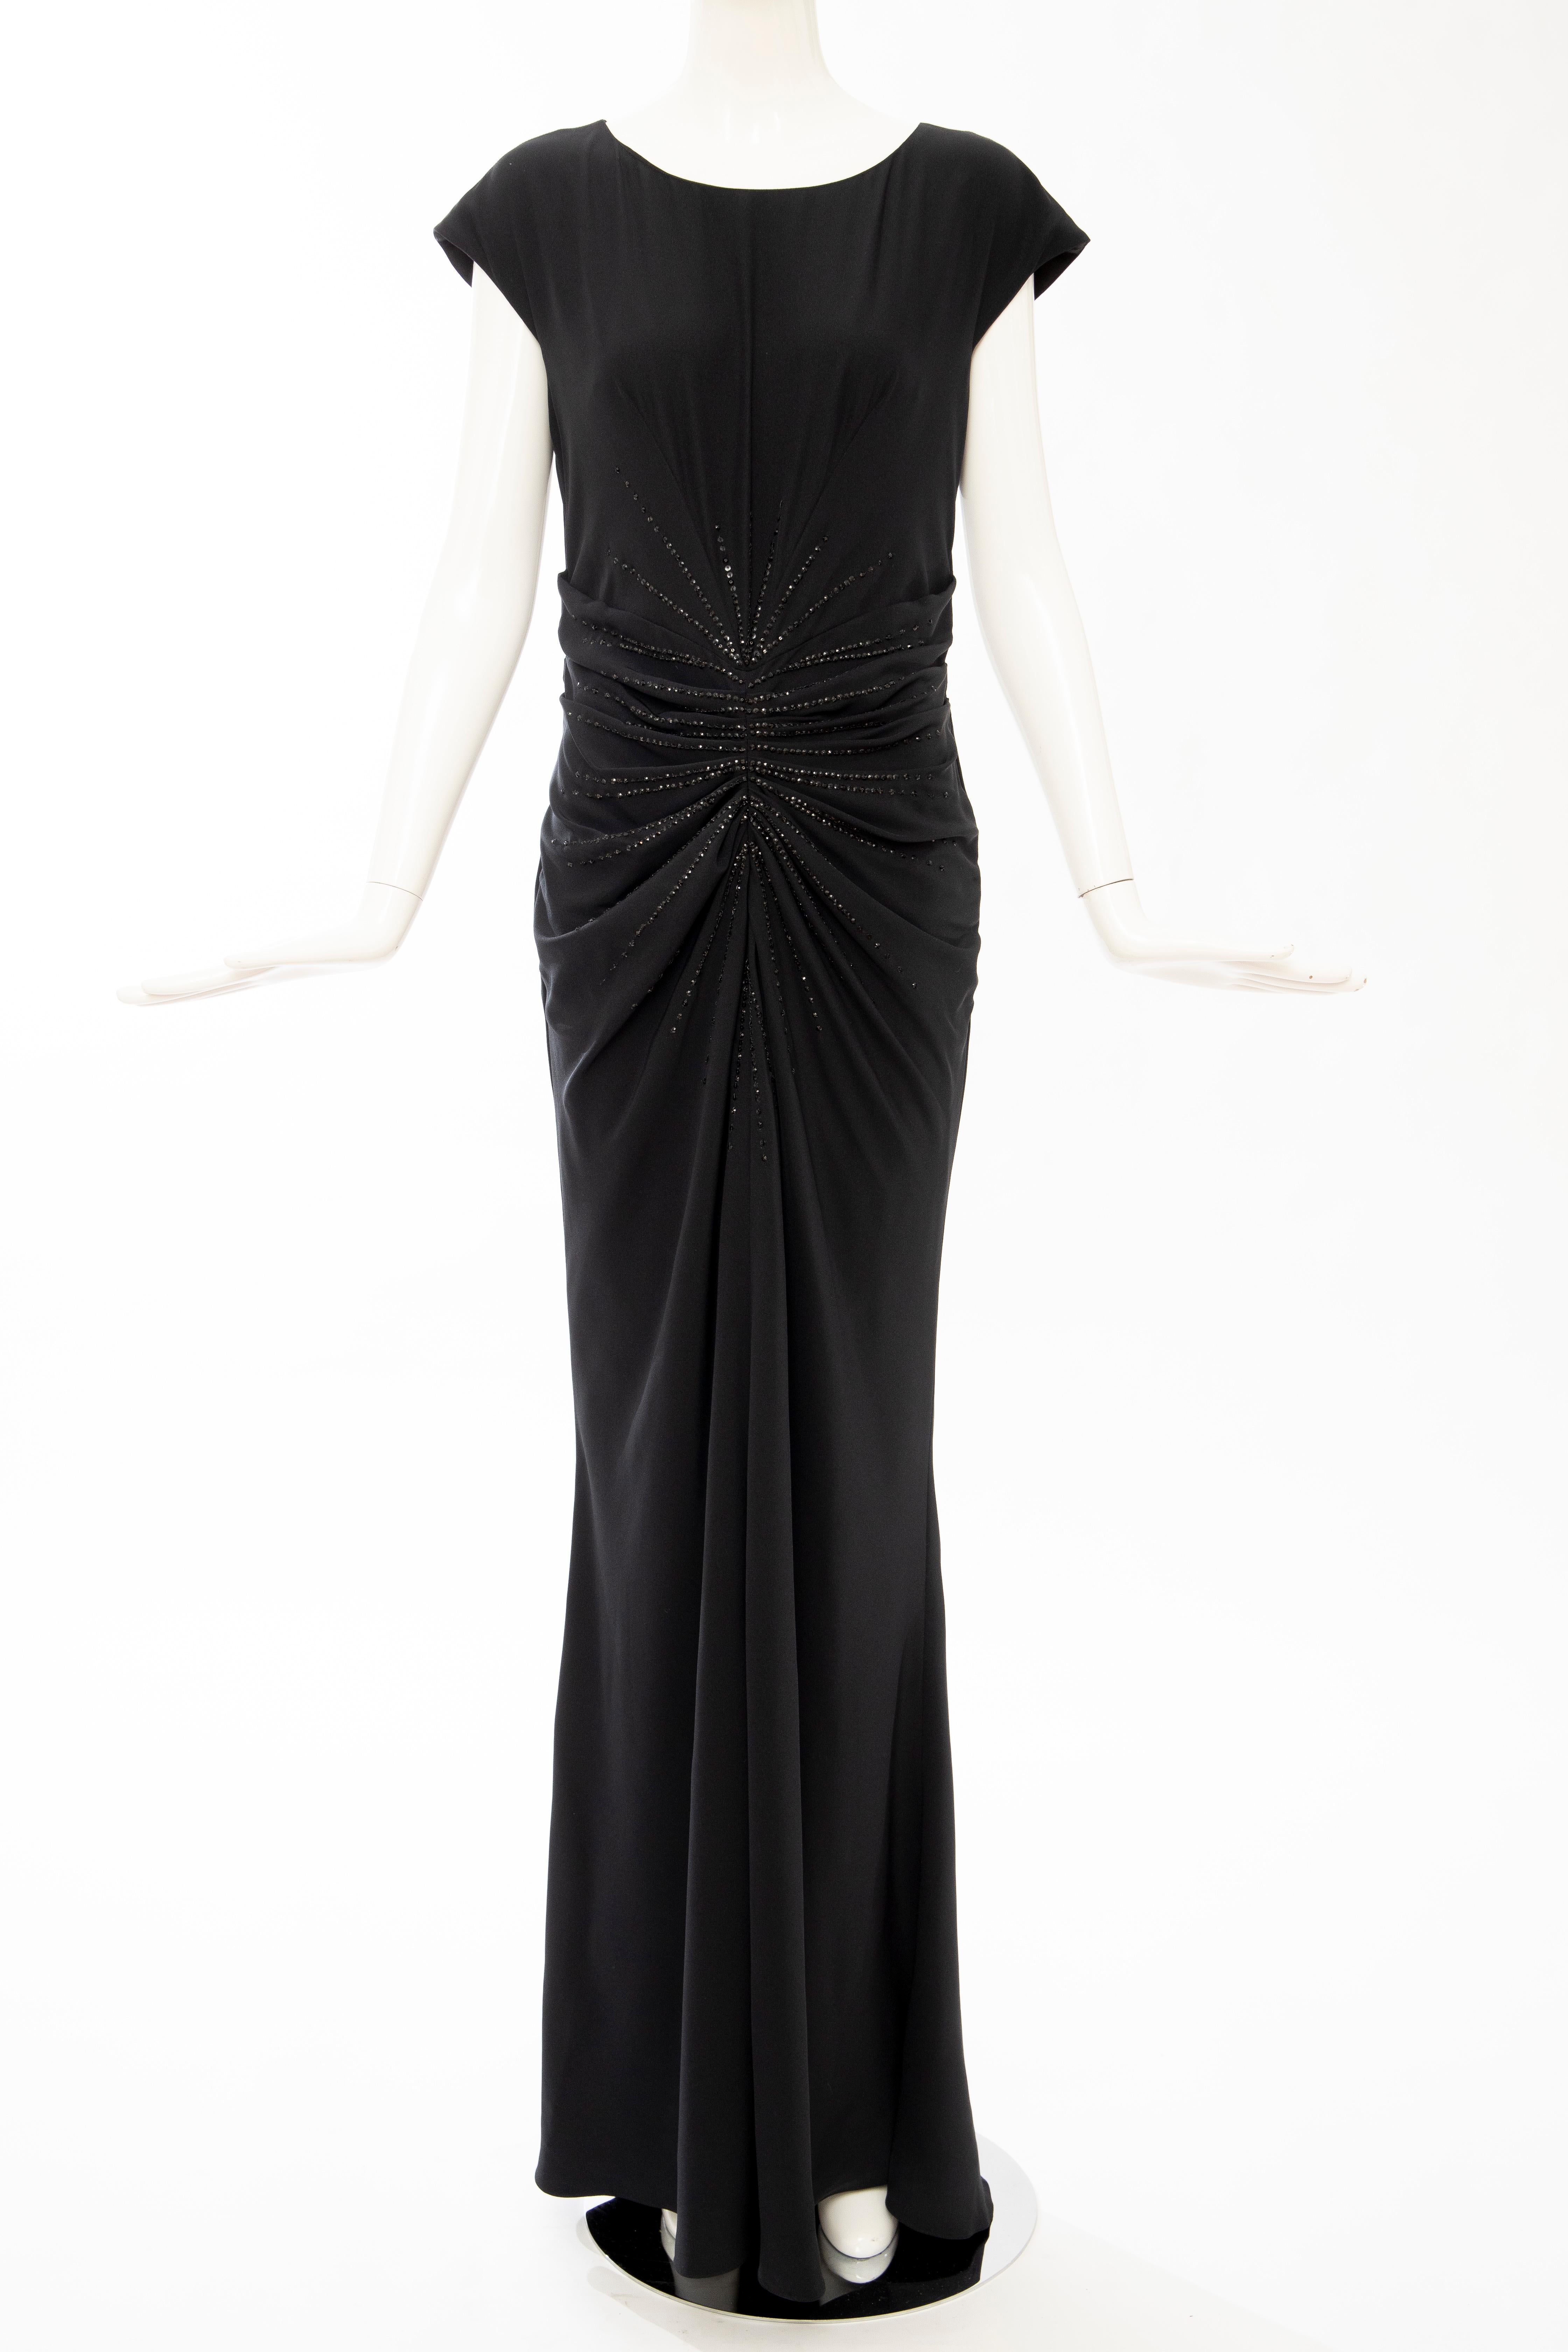 John Galliano for Christian Dior, Spring 2008 (Runway Look 42) black silk sleeveless evening dress with embroidered PVC glass embellishments throughout, crew neck and concealed zip closure at back.

FR. 42, IT. 46, GB. 14, US. 10

Bust: 34, Waist: